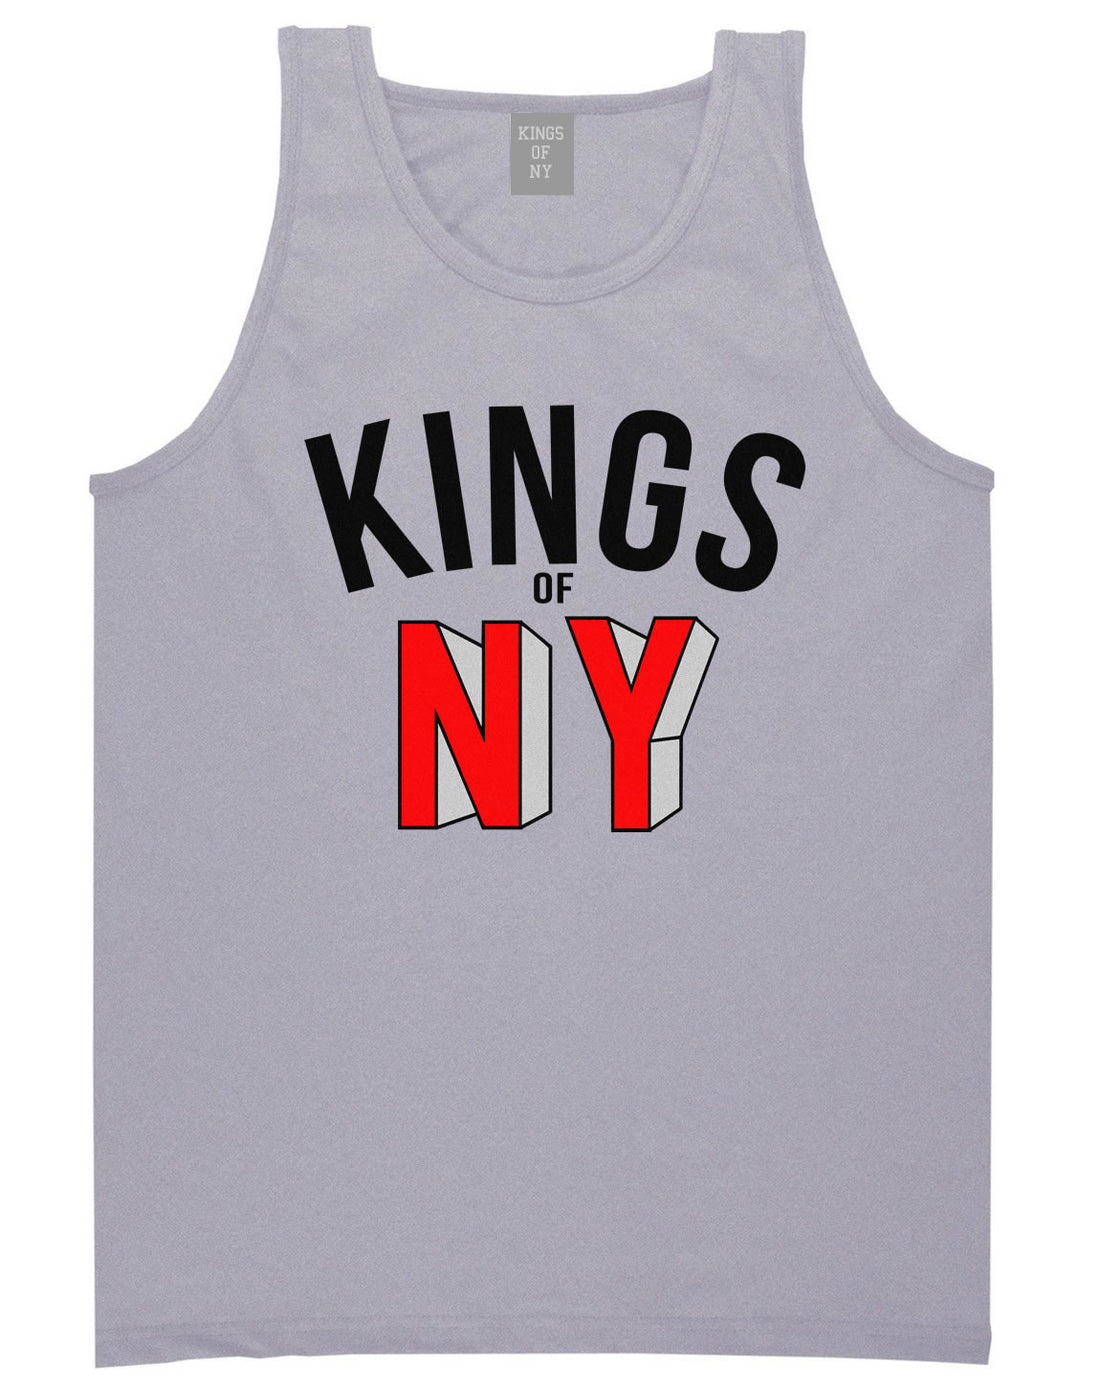 NY Red Block Letter Printed Tank Top in Grey by Kings Of NY